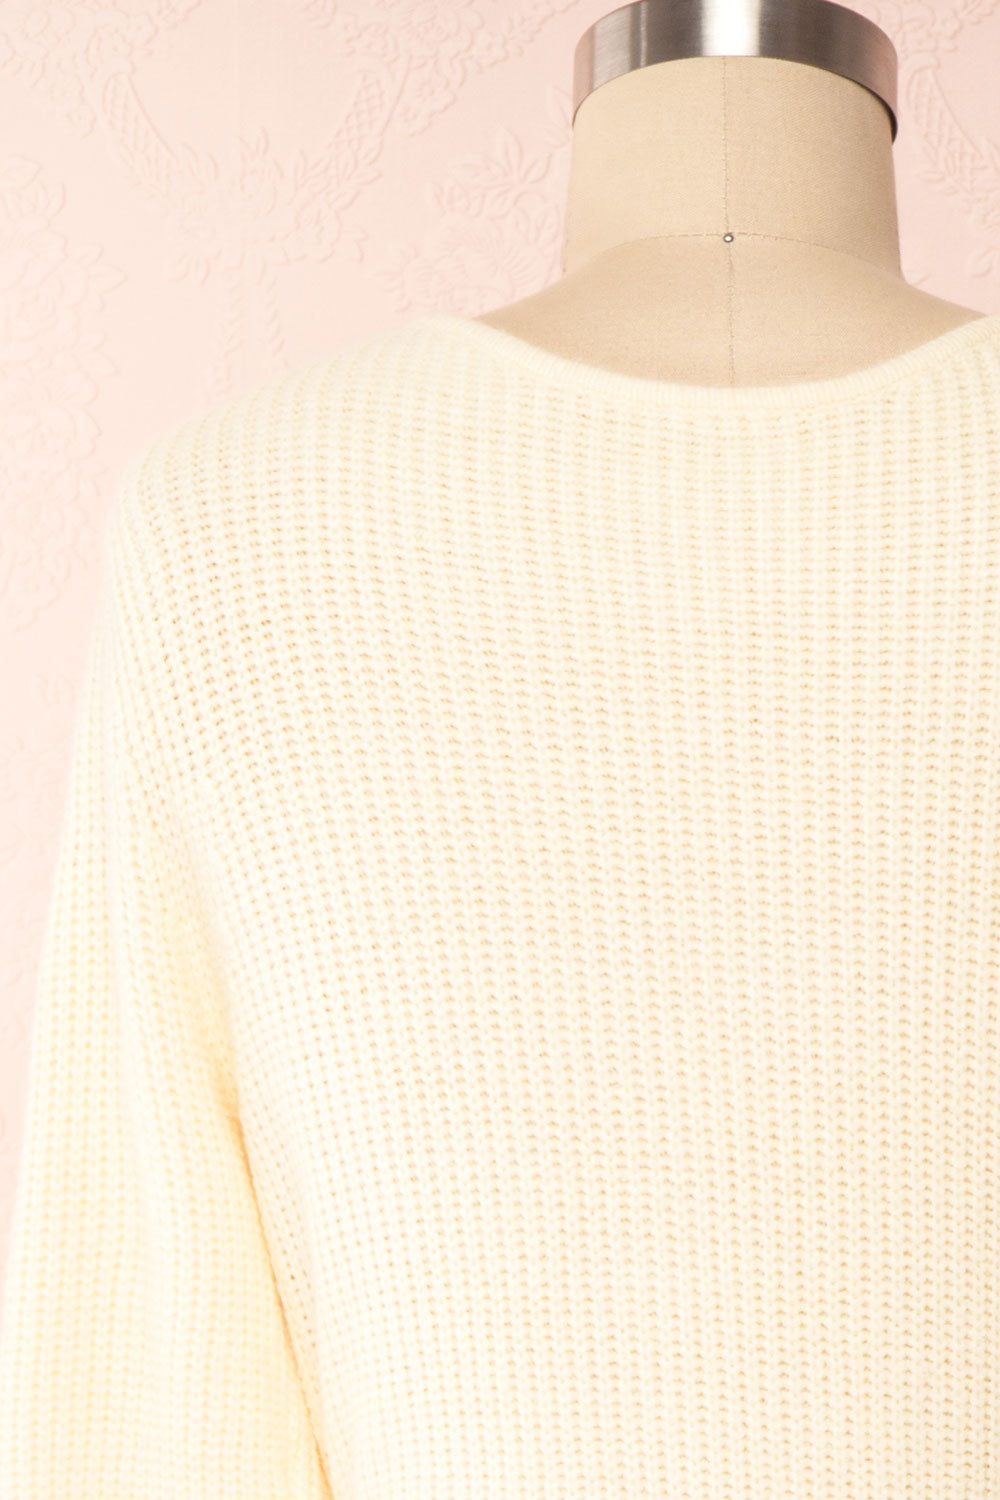 Polkan White Knit Wrap Cardigan | Boutique 1861 back close-up